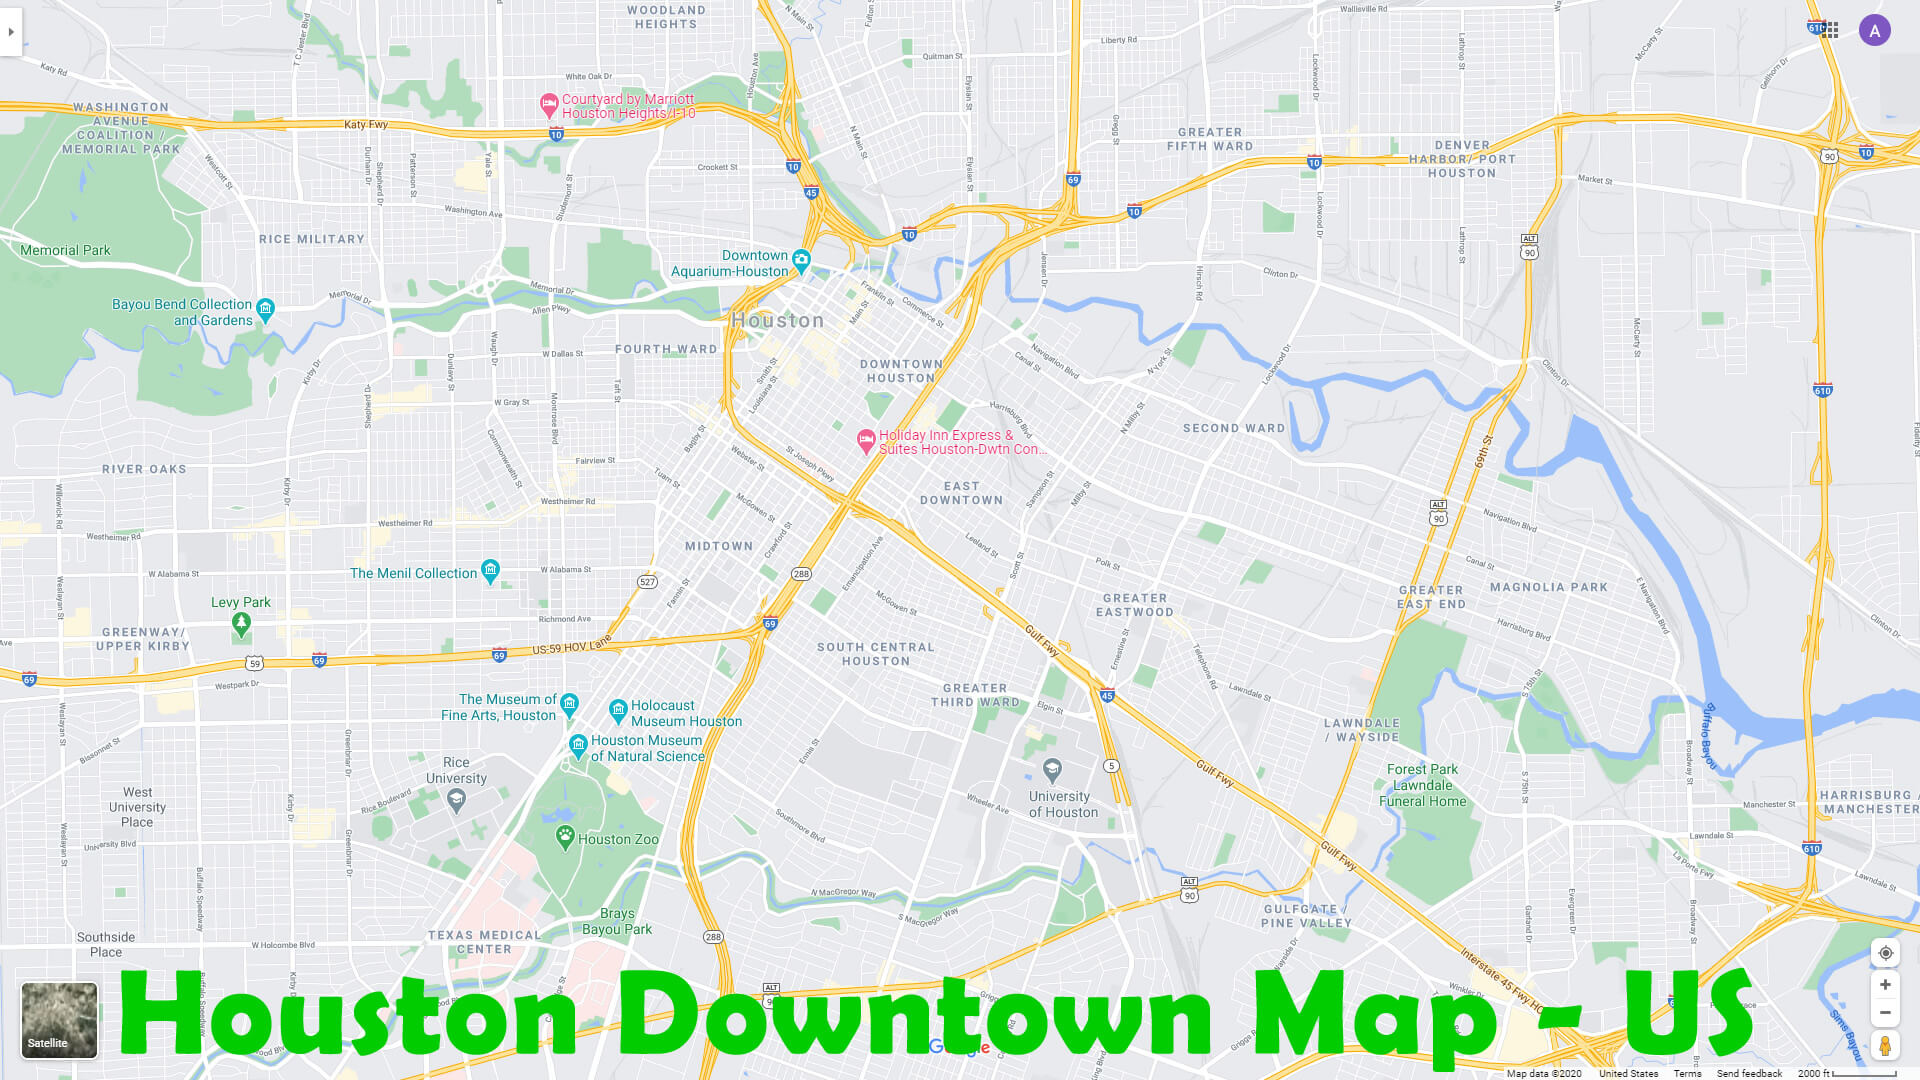 Houston Downtown Map   US